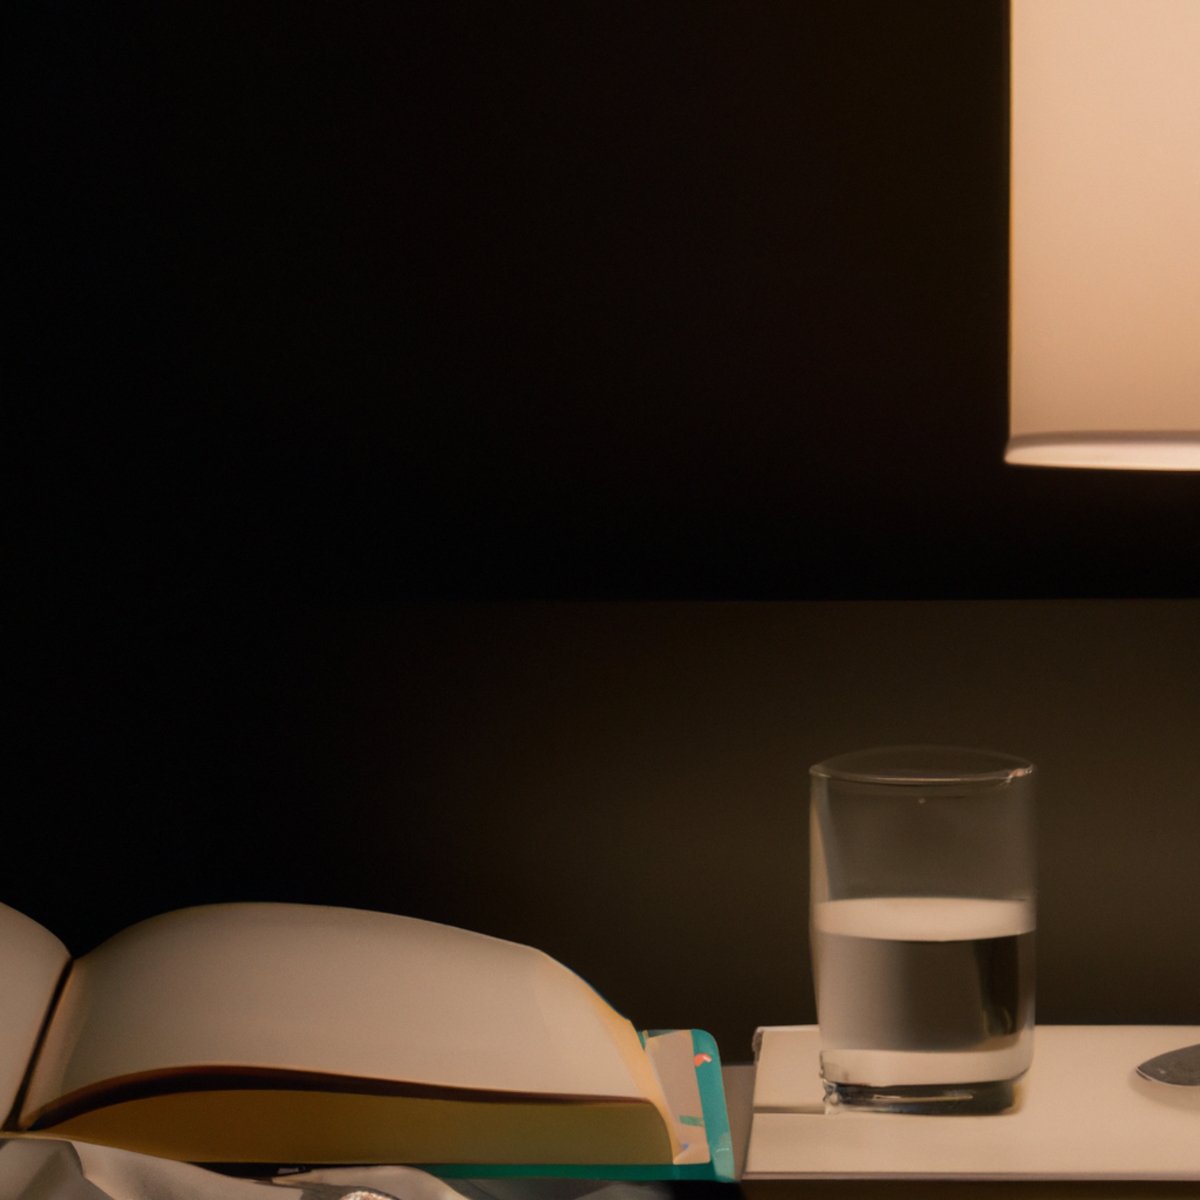 Stress management tips for busy professionals - Nightstand with book, lamp, and half-full glass of water. Calm and relaxed atmosphere suggests quality sleep despite busy schedule.